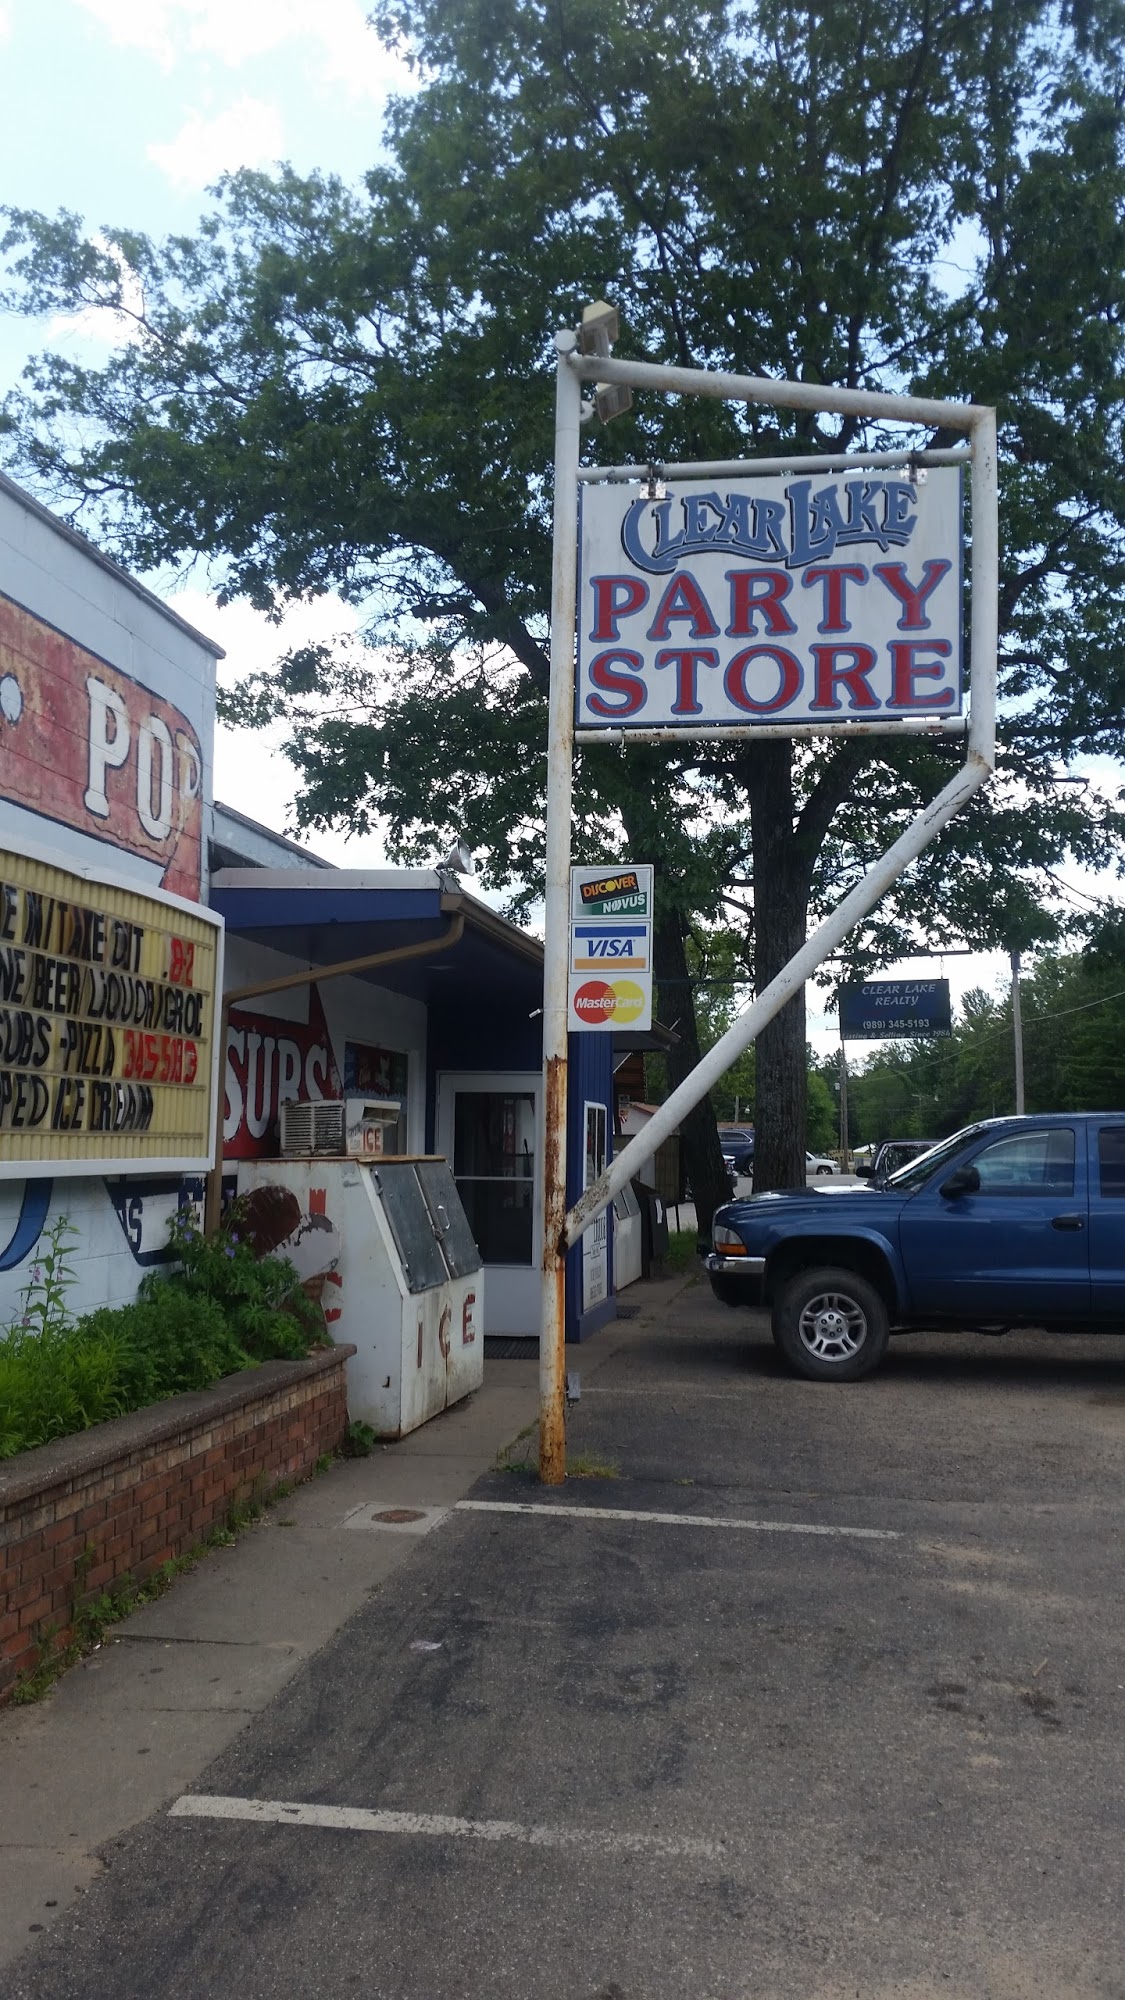 Clear Lake Party Store